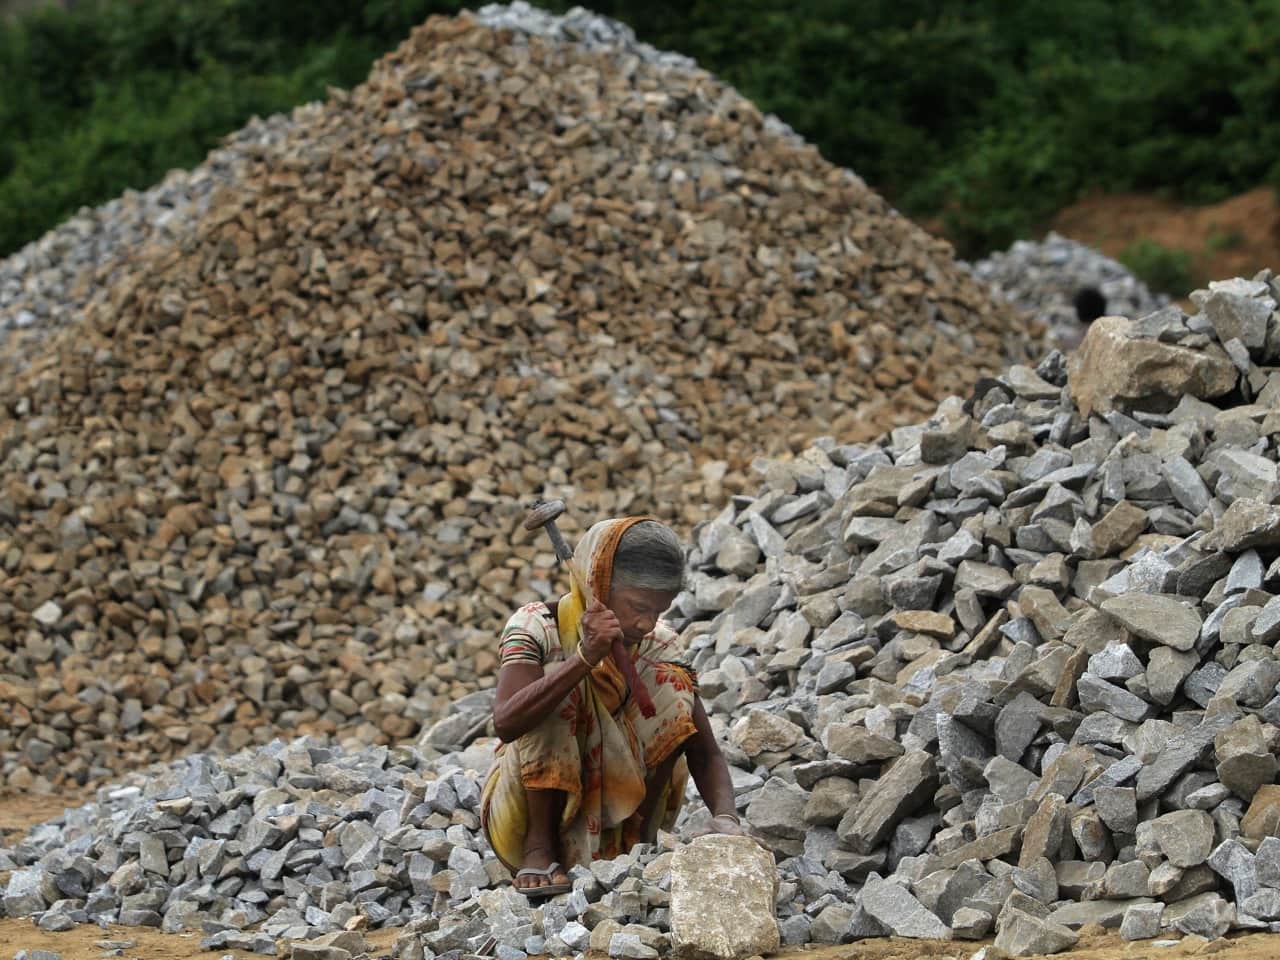 A labourer breaks stones on the outskirts of Gauhati, India, 5 June 2014, AP Photo/Anupam Nath